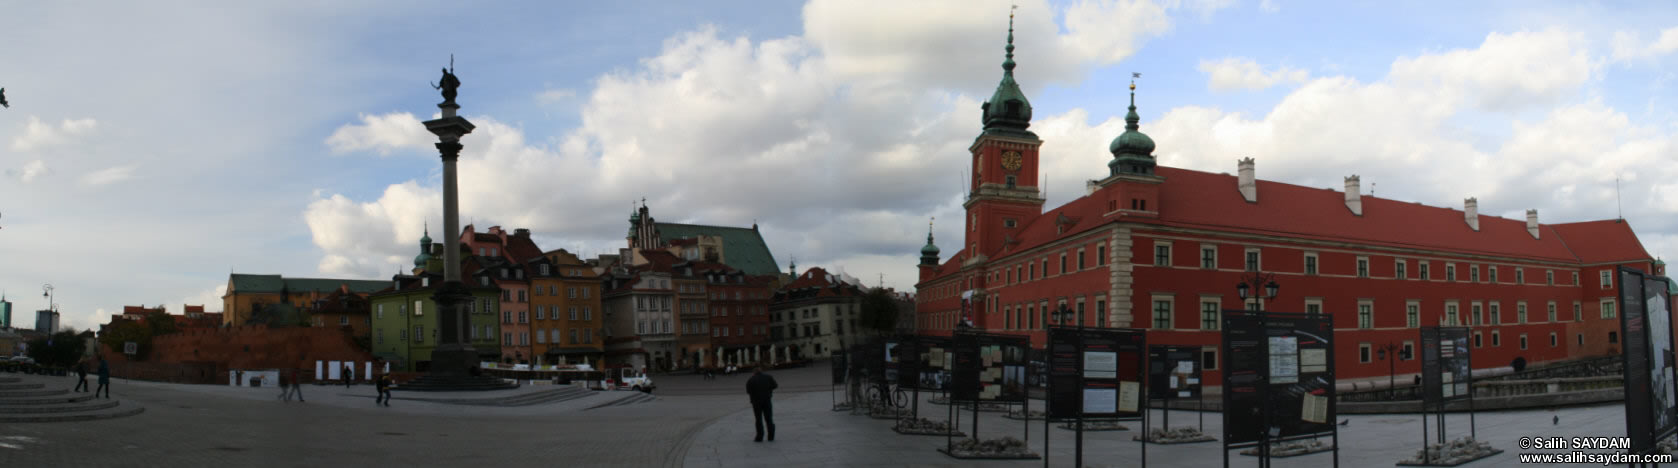 Old Town Panorama 10 (Castle Square, Warsaw, Poland)